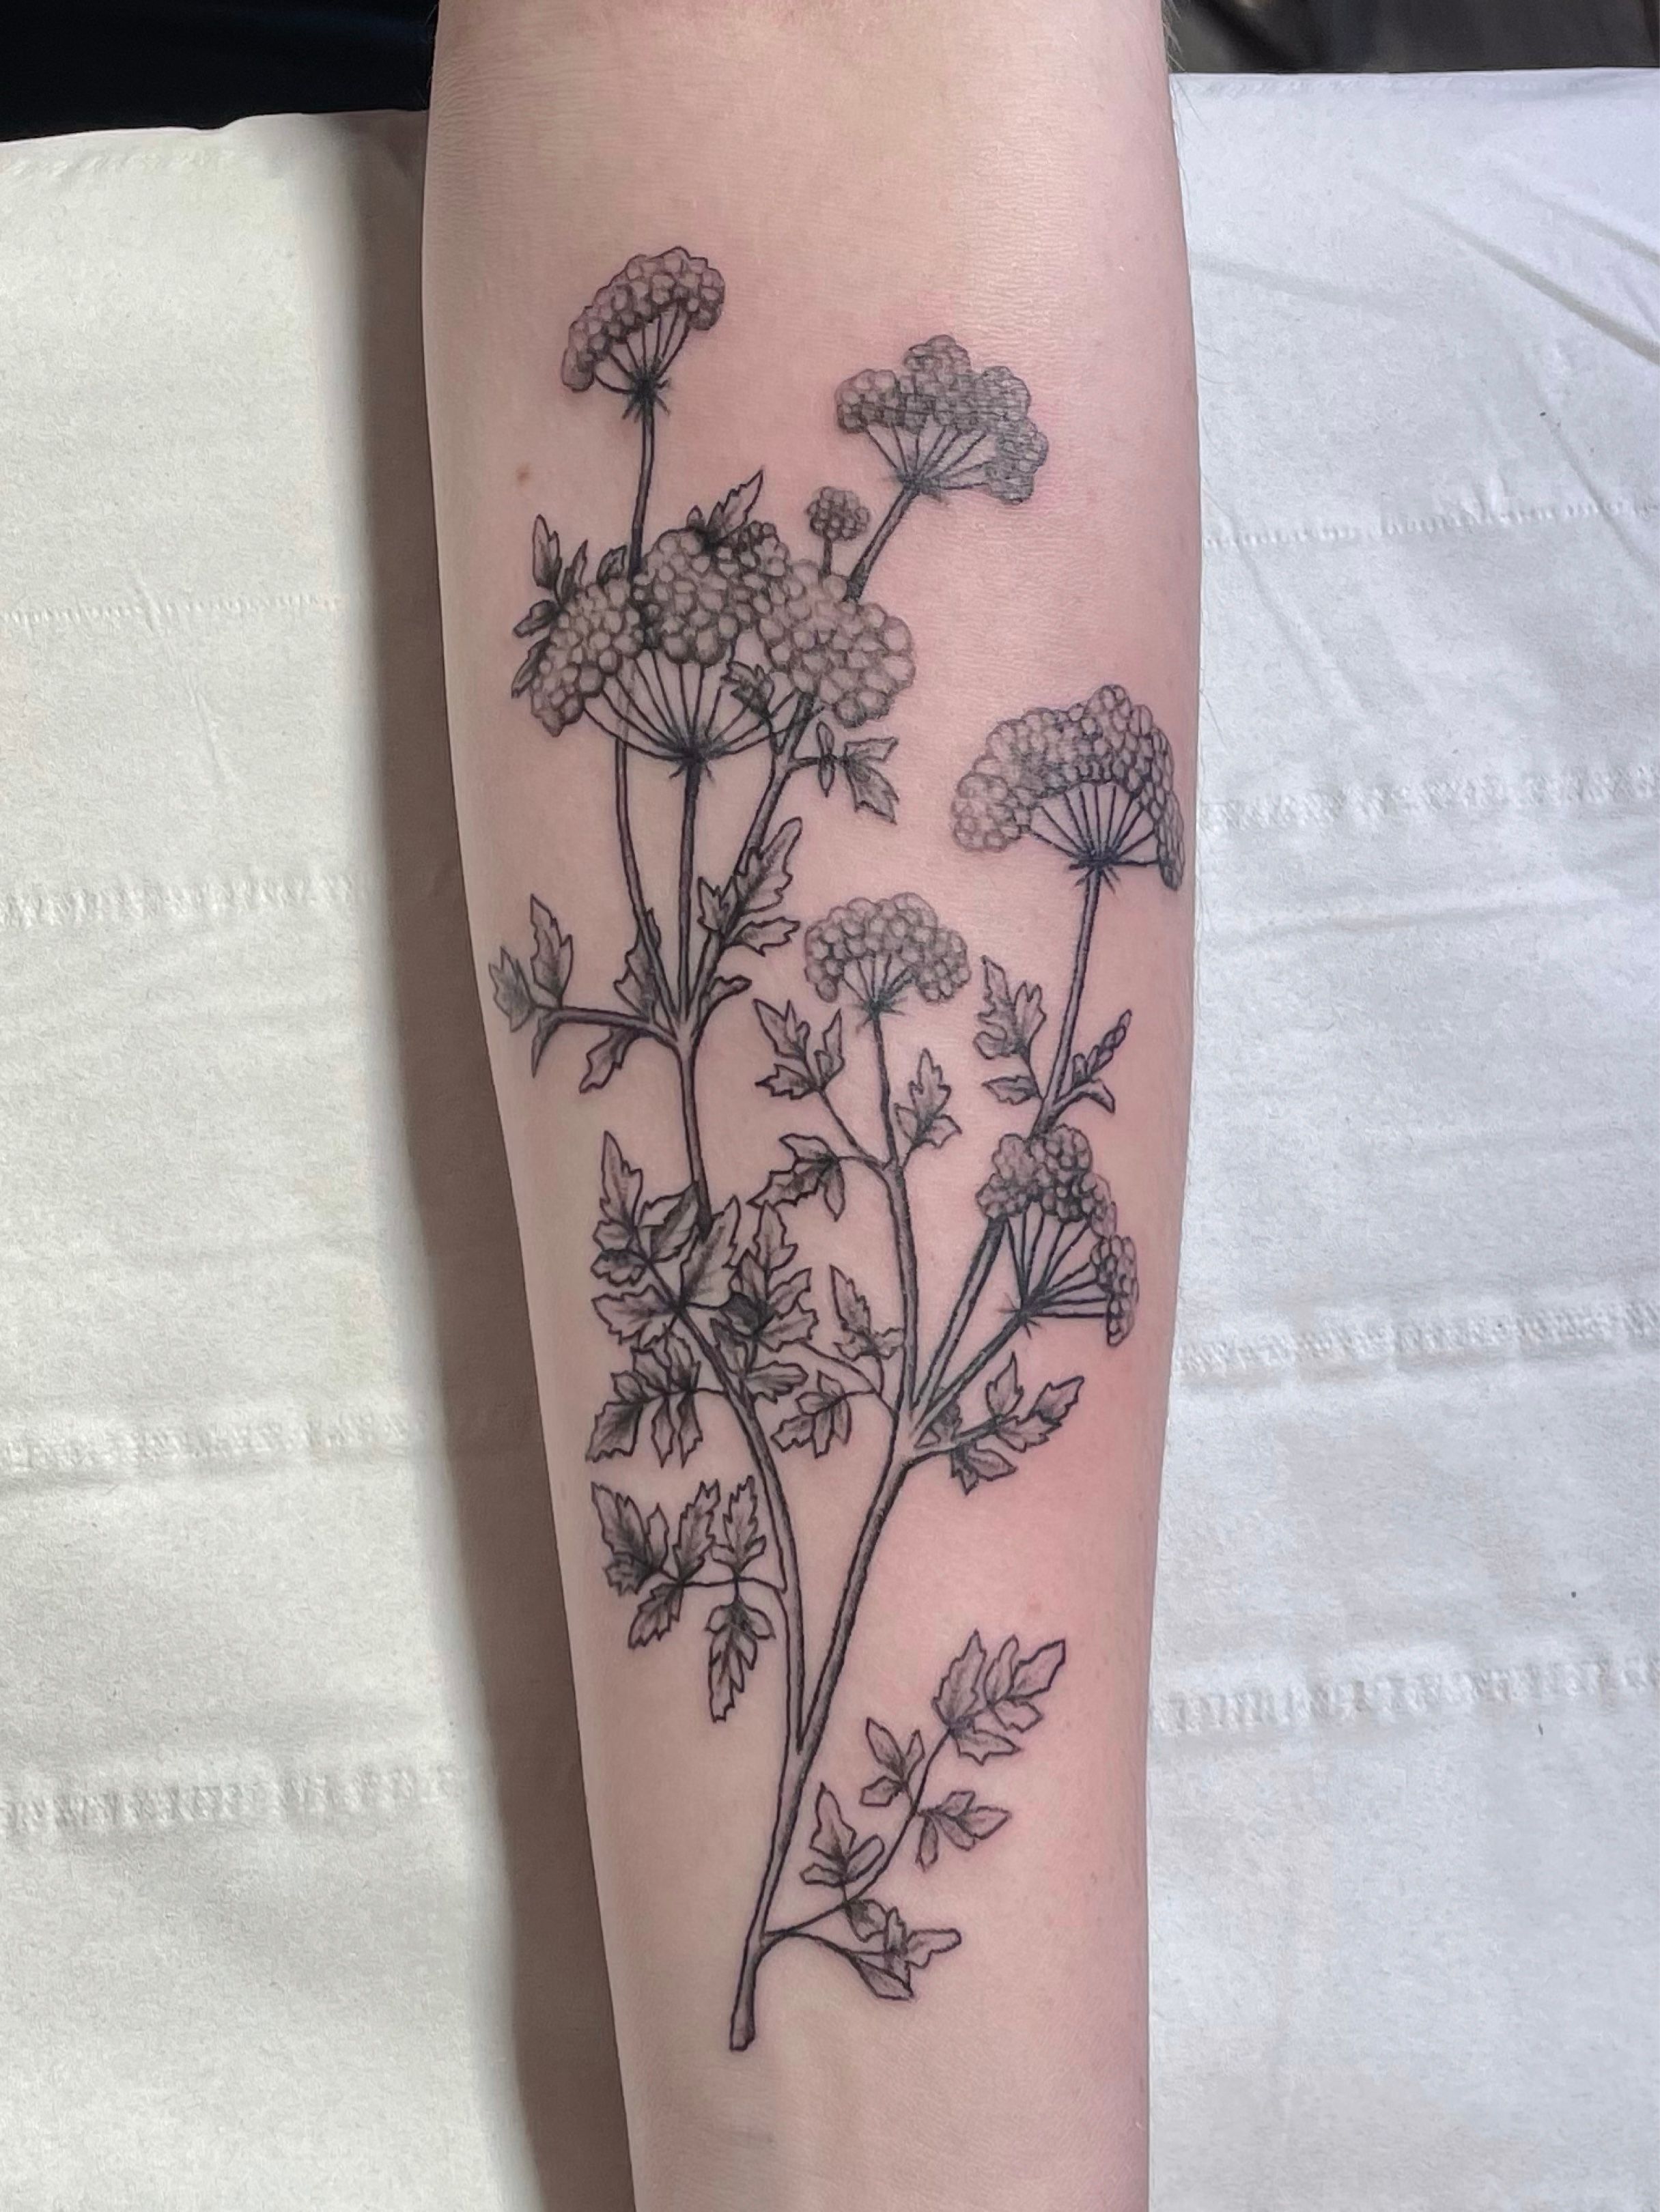 Gorgeous flower tattoos that are anything but basic  CafeMomcom